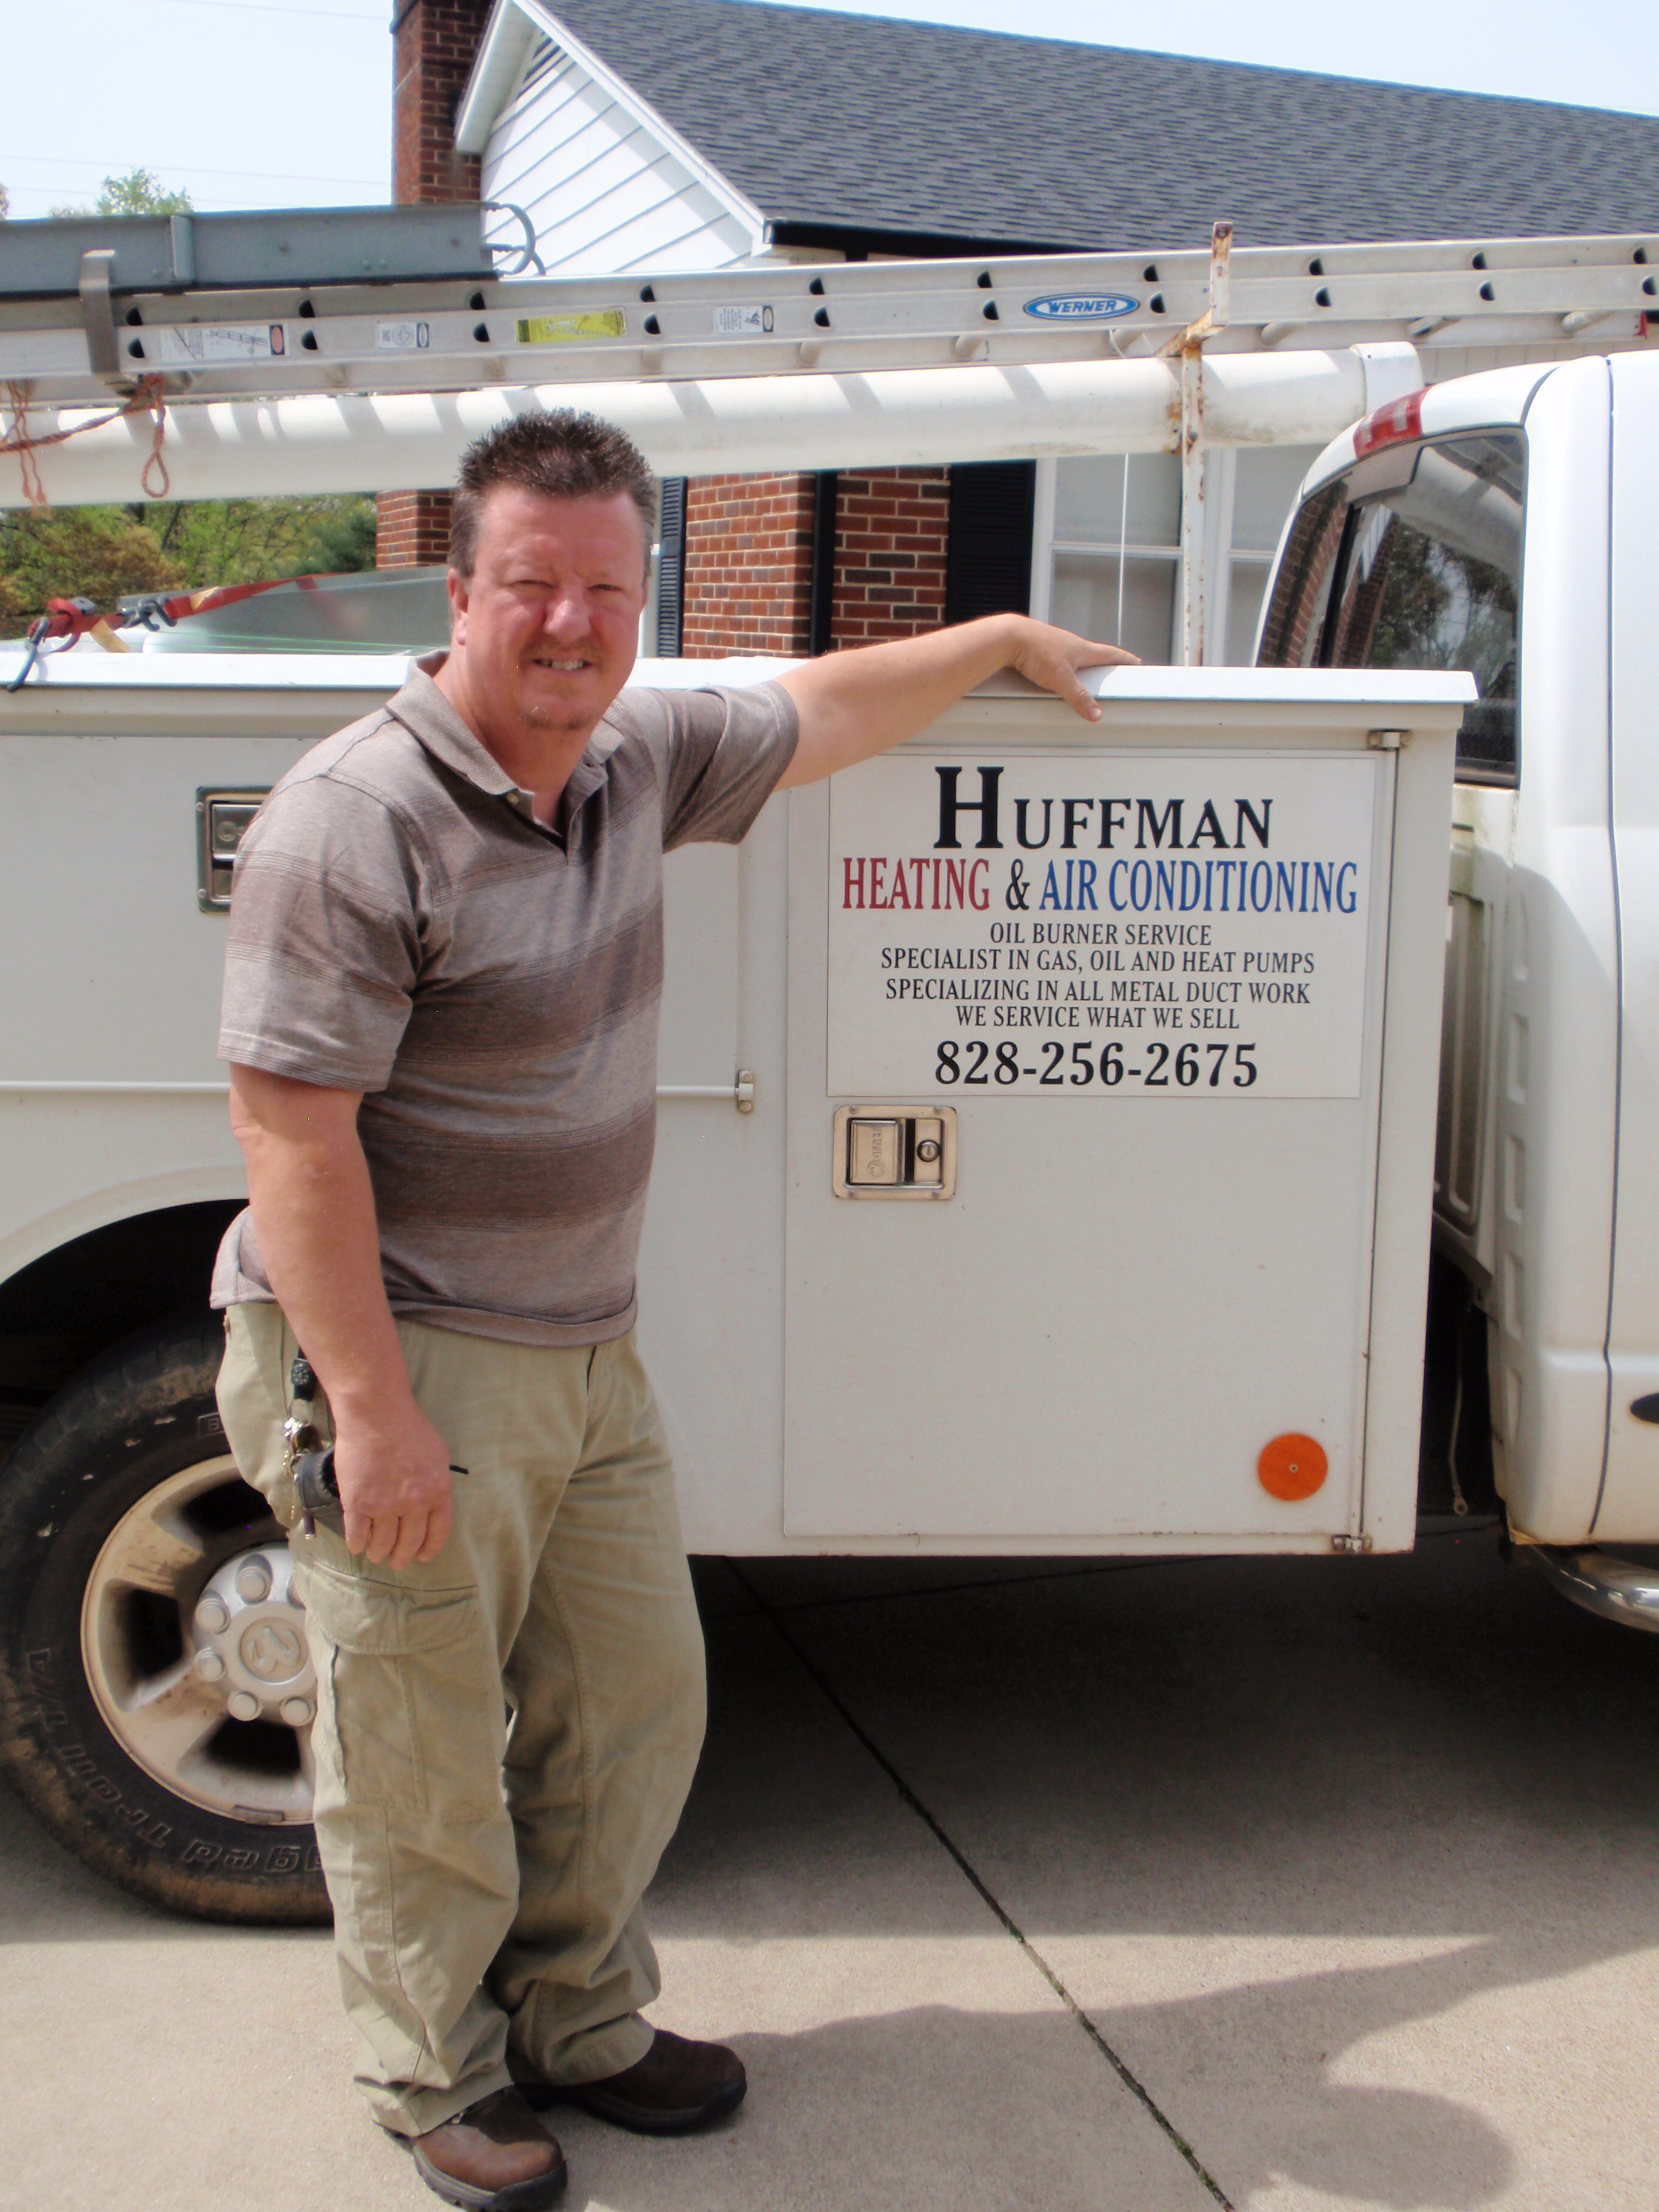 Huffman Heating & Air Conditioning Photo